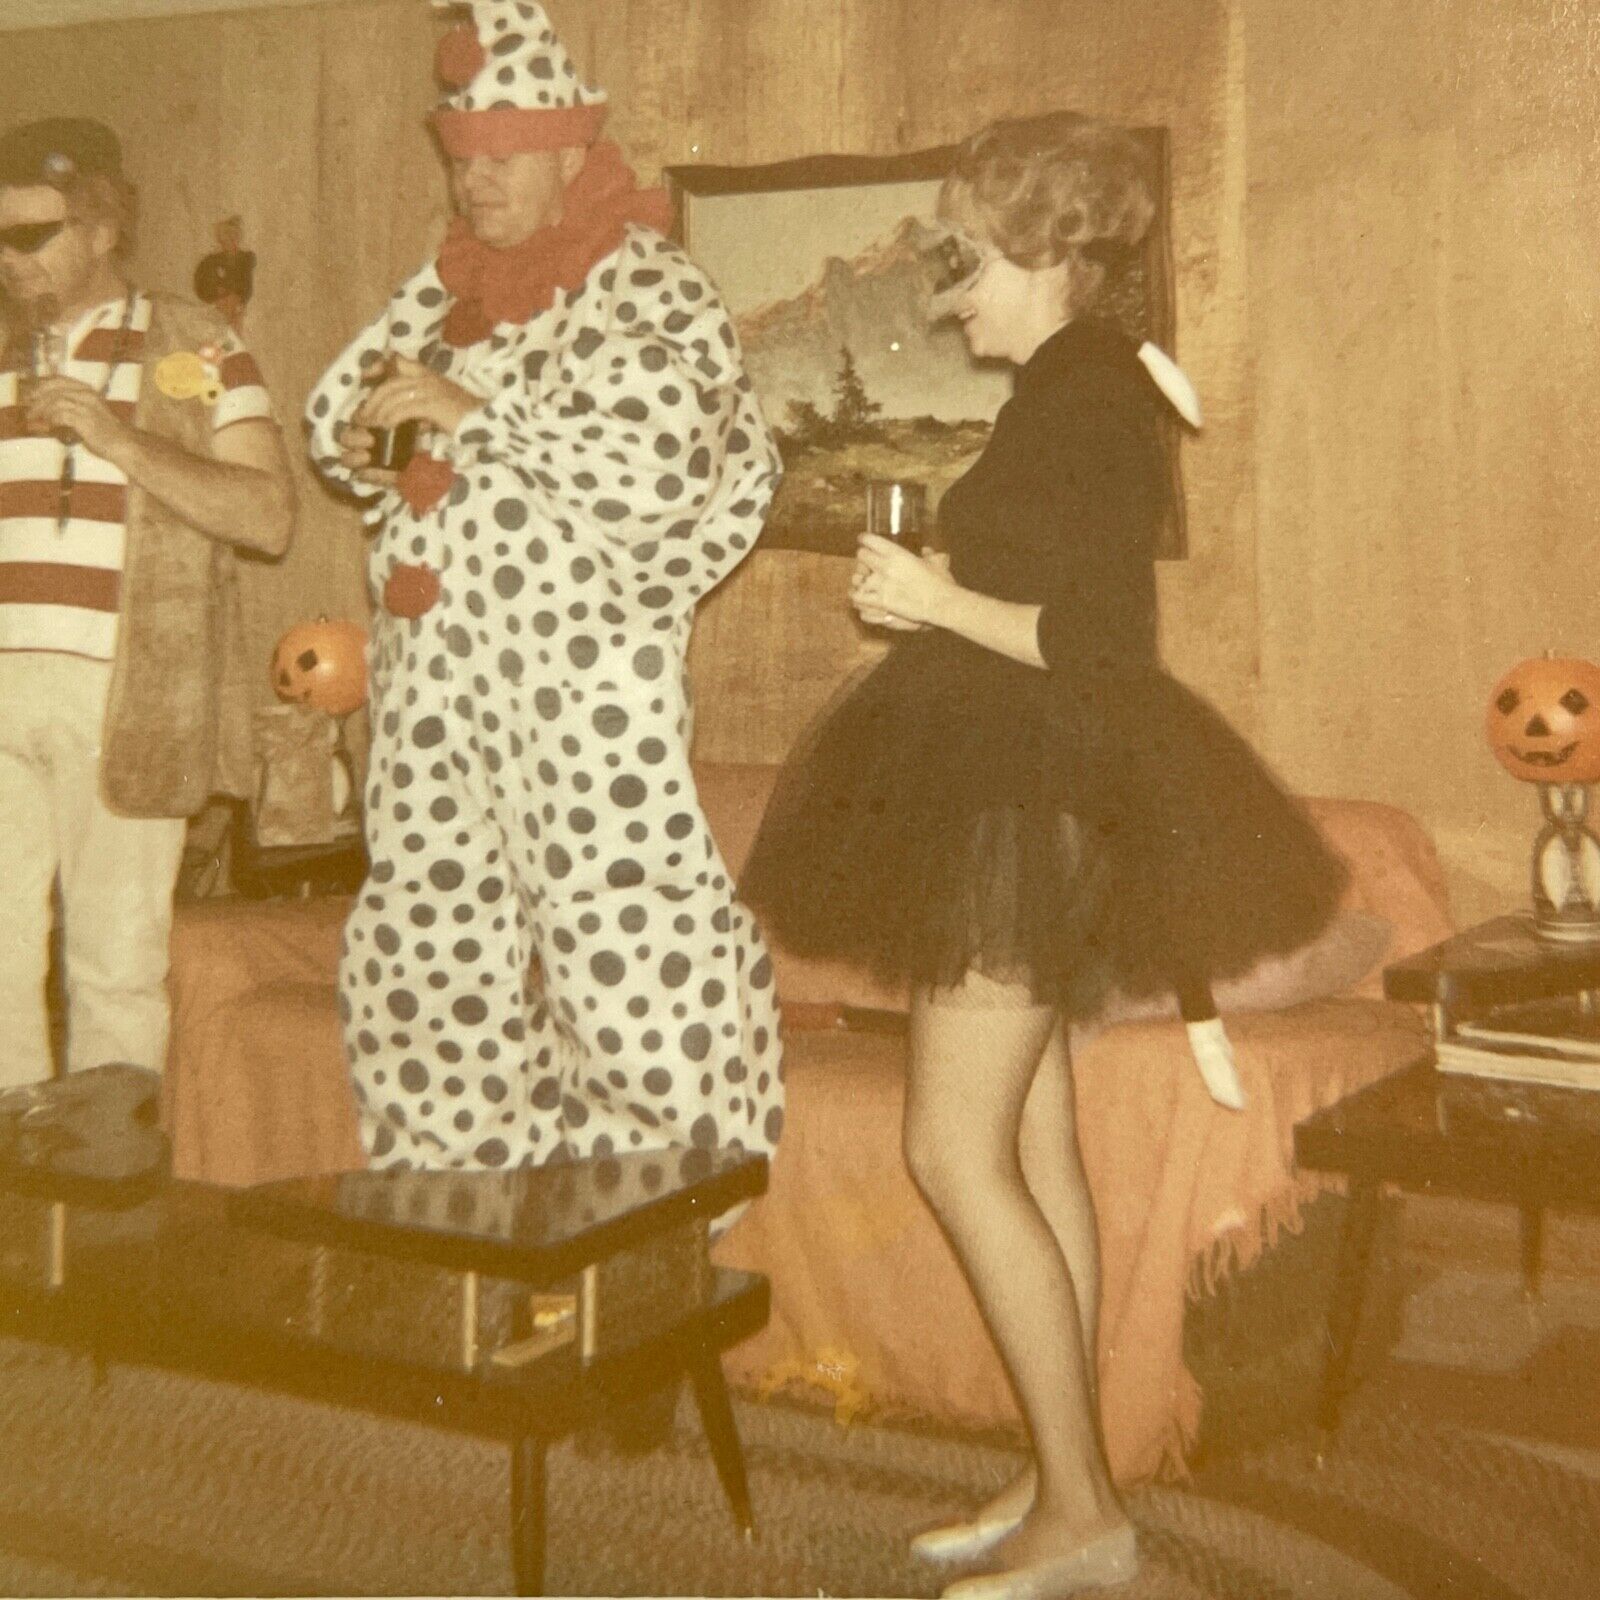 S9 Photograph 1960-70's Halloween Costume Party Clown Pretty Woman Legs Sexy